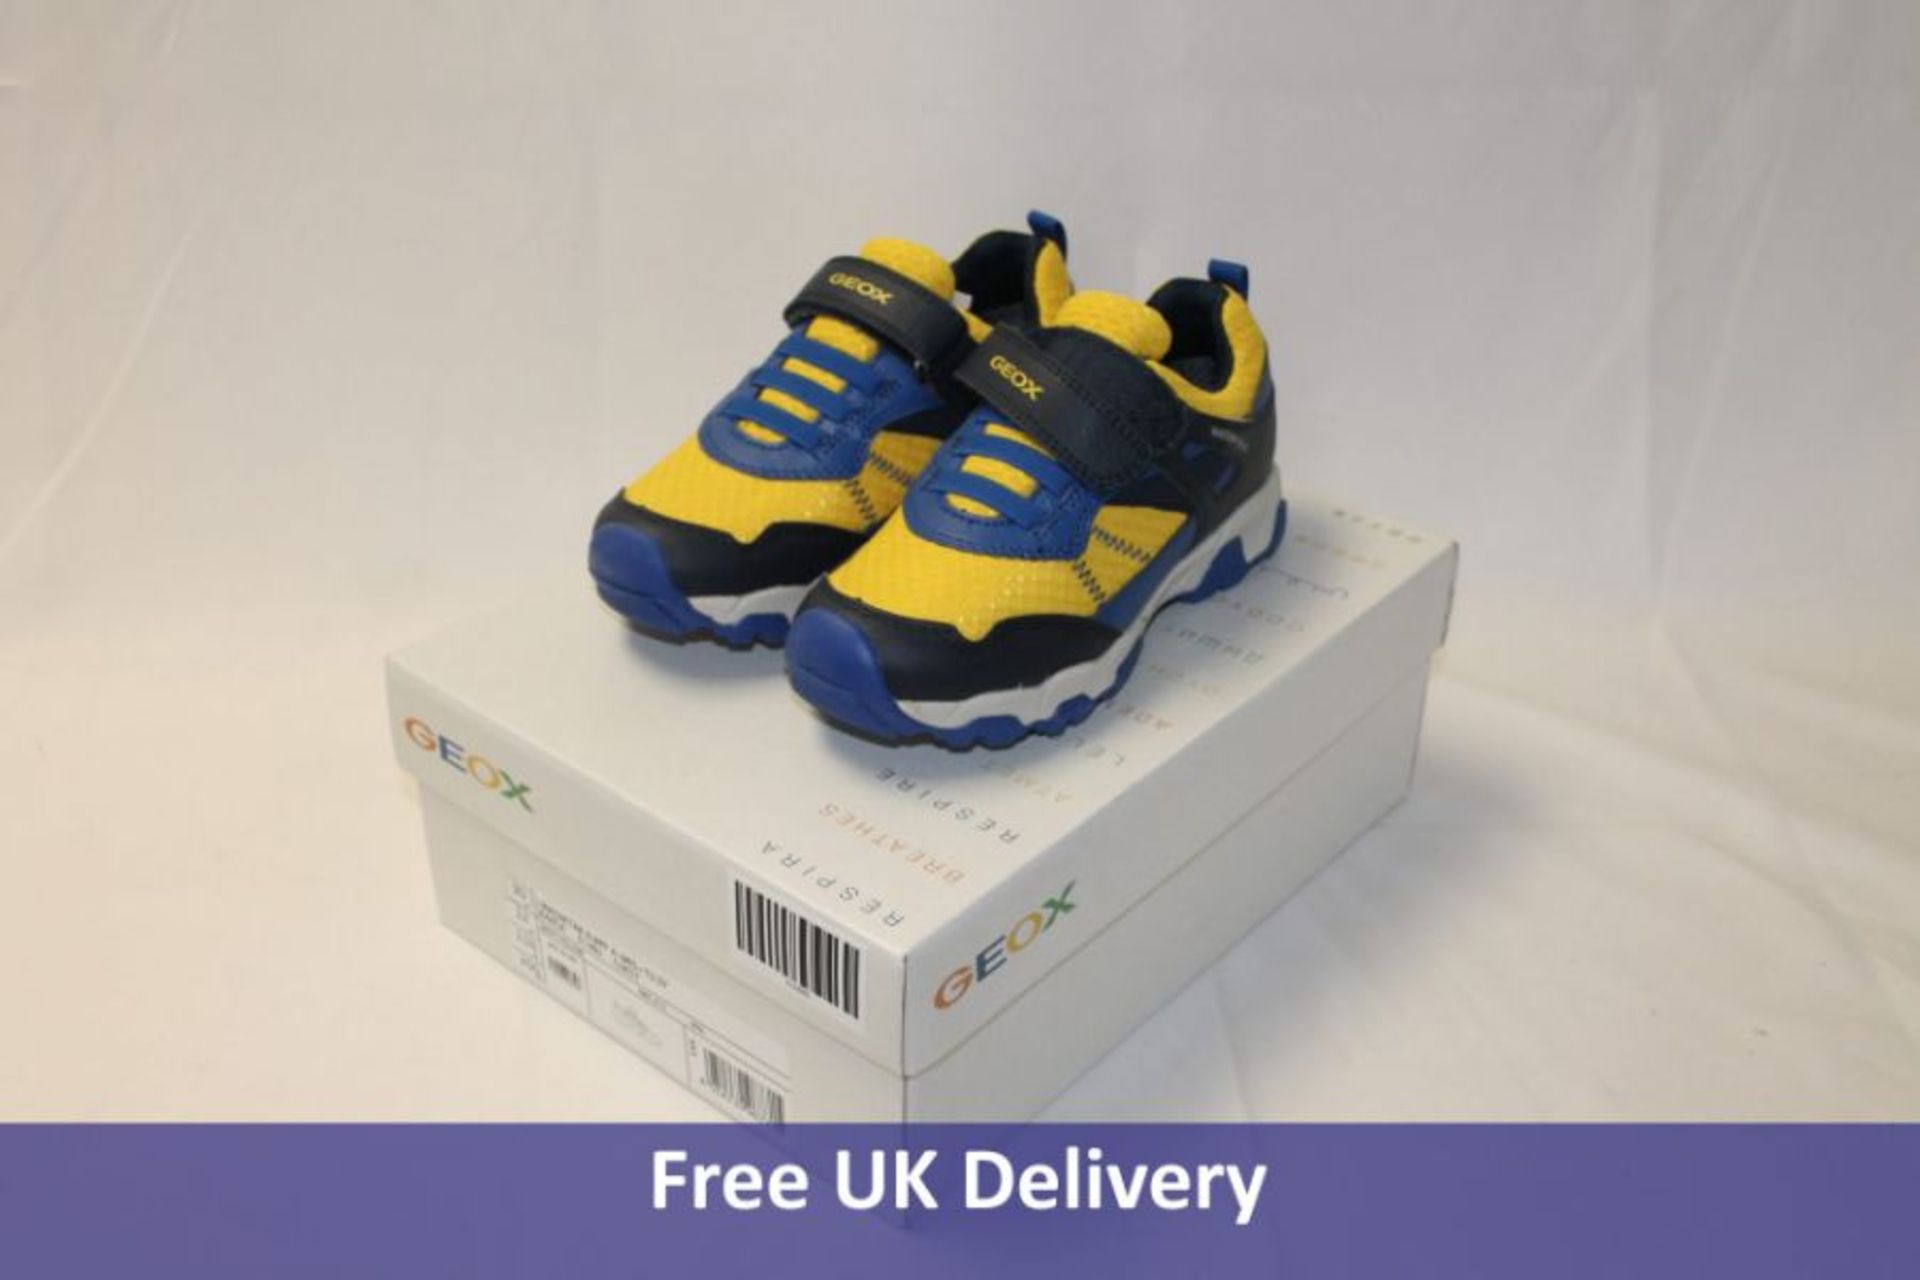 Geox B Shaax B. D - Wax/Synthetic Kid's Trainers, Cognac/Navy, UK 7 and Geox Kids Trainers, Navy/Yel - Image 2 of 2